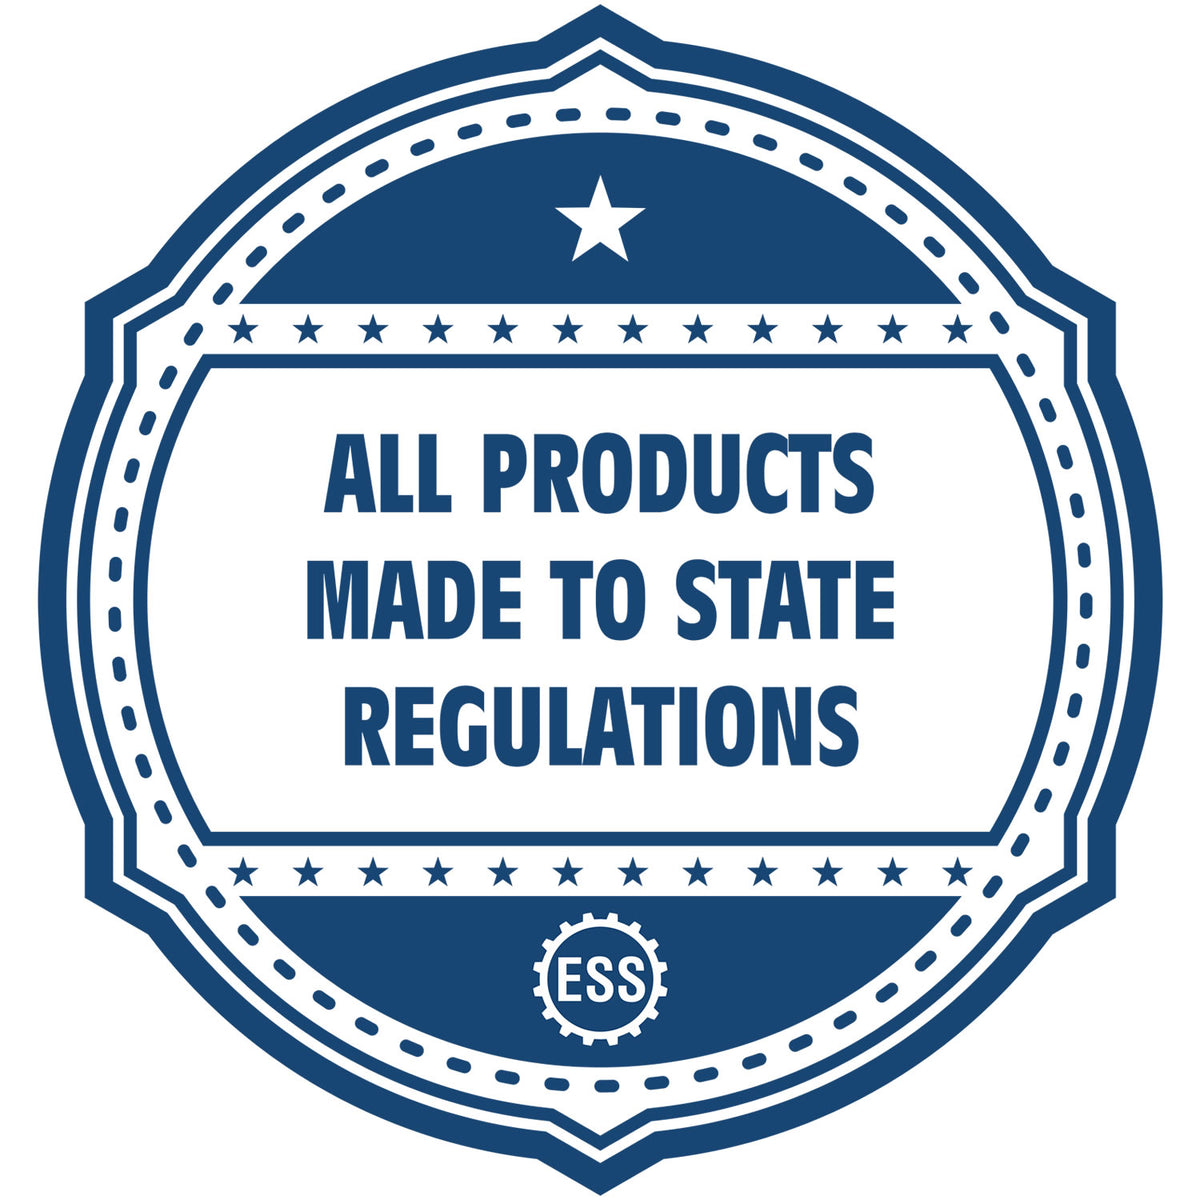 An icon or badge element for the Arizona Professional Engineer Seal Stamp showing that this product is made in compliance with state regulations.